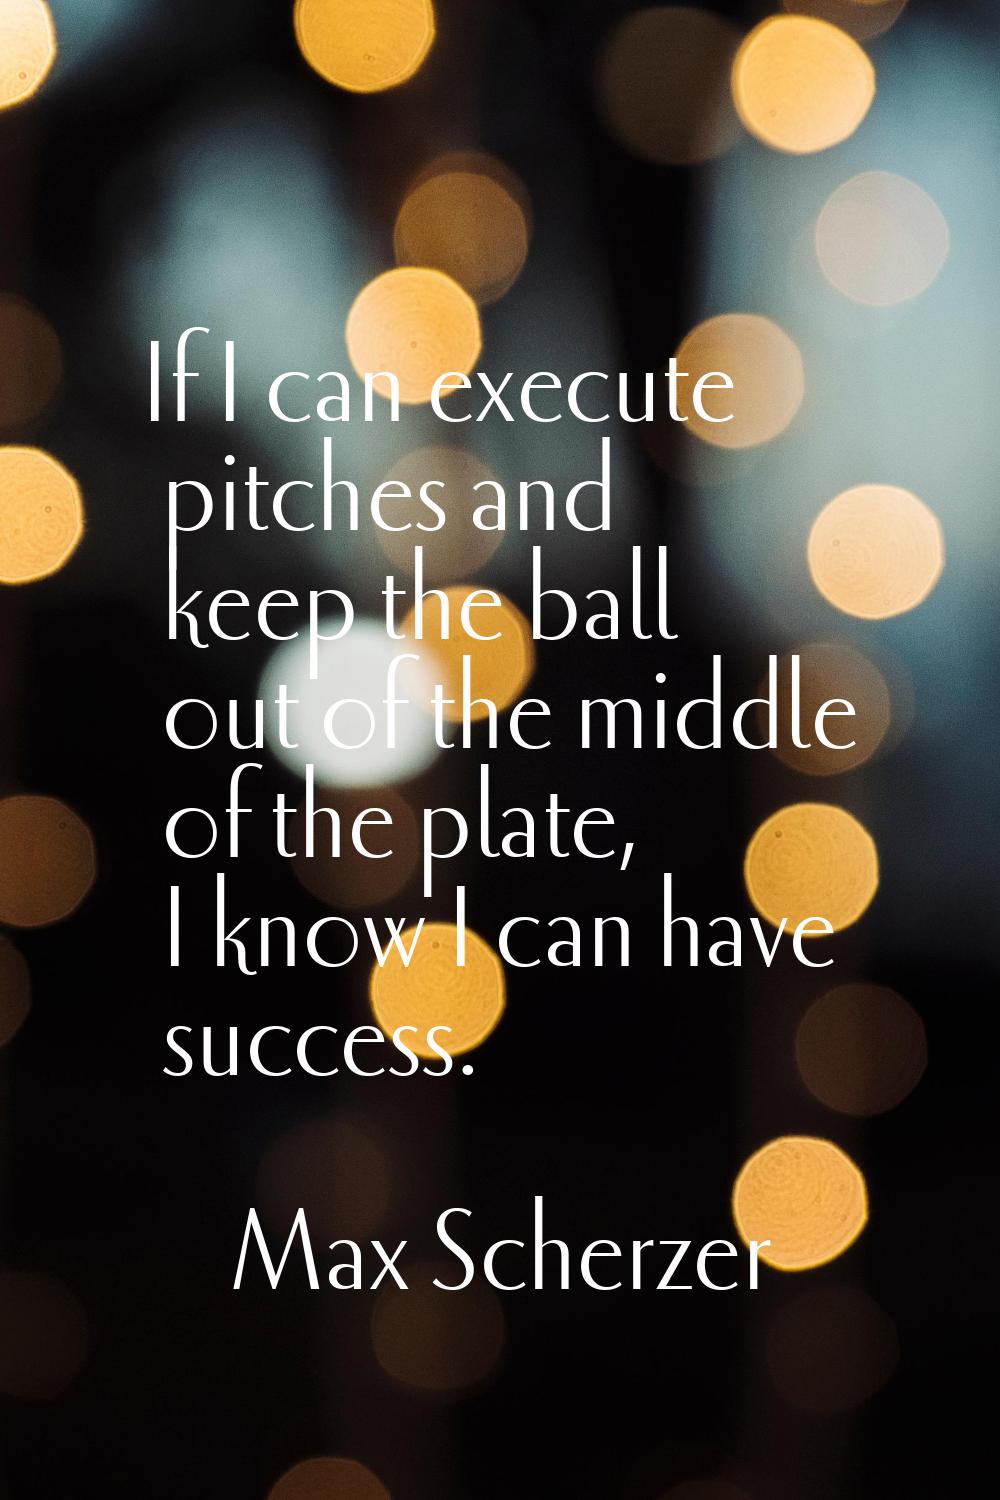 If I can execute pitches and keep the ball out of the middle of the plate, I know I can have succes